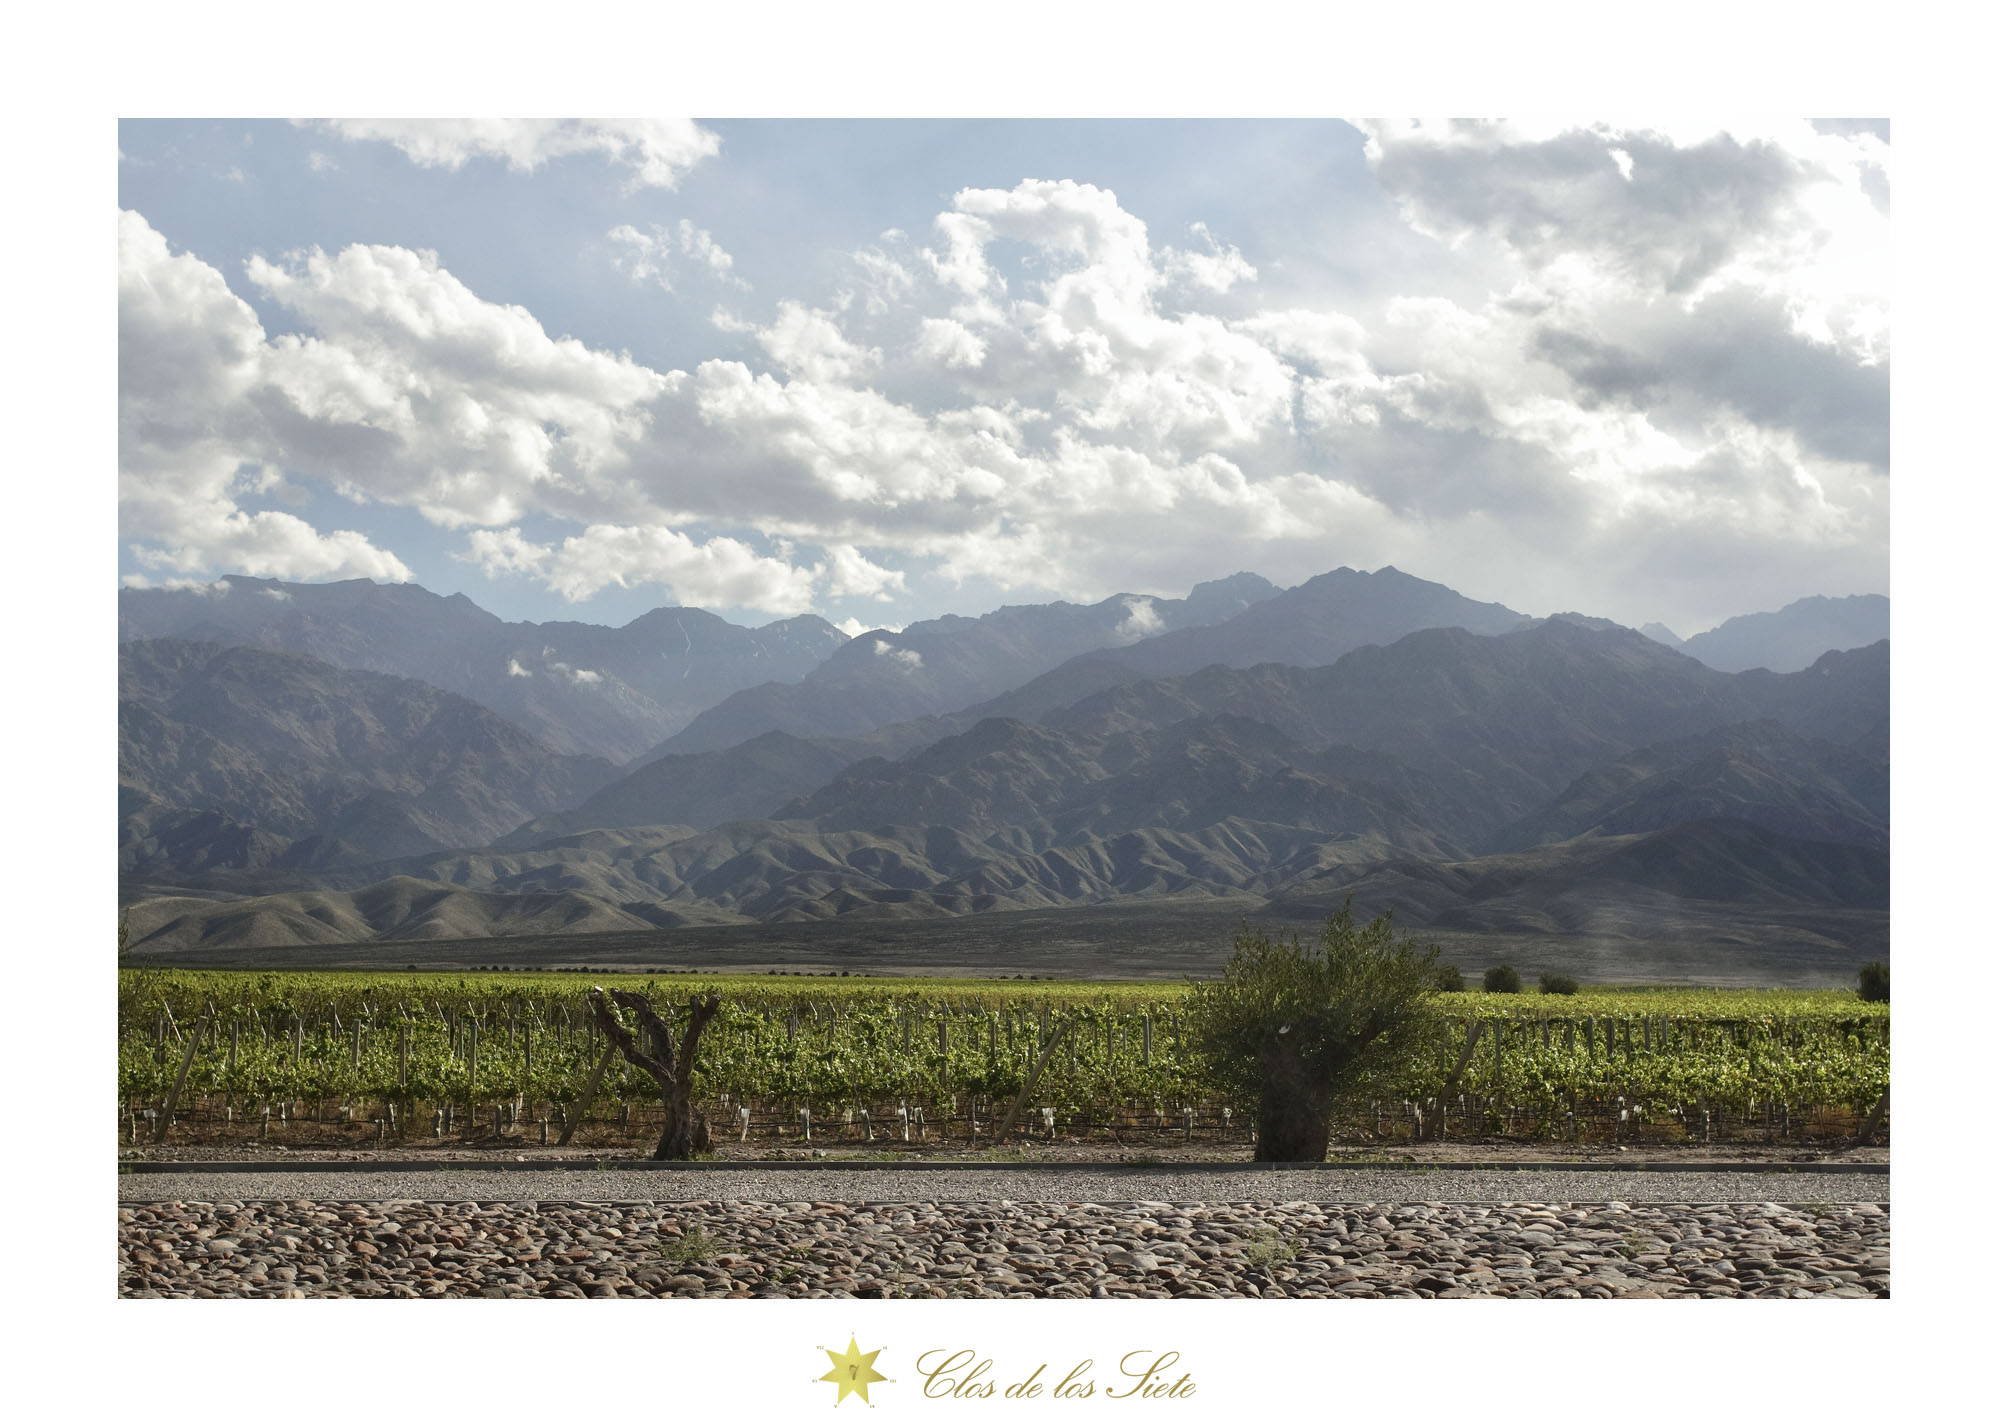 Picturesque CLOS DE LOS SIETE with Andes in the background